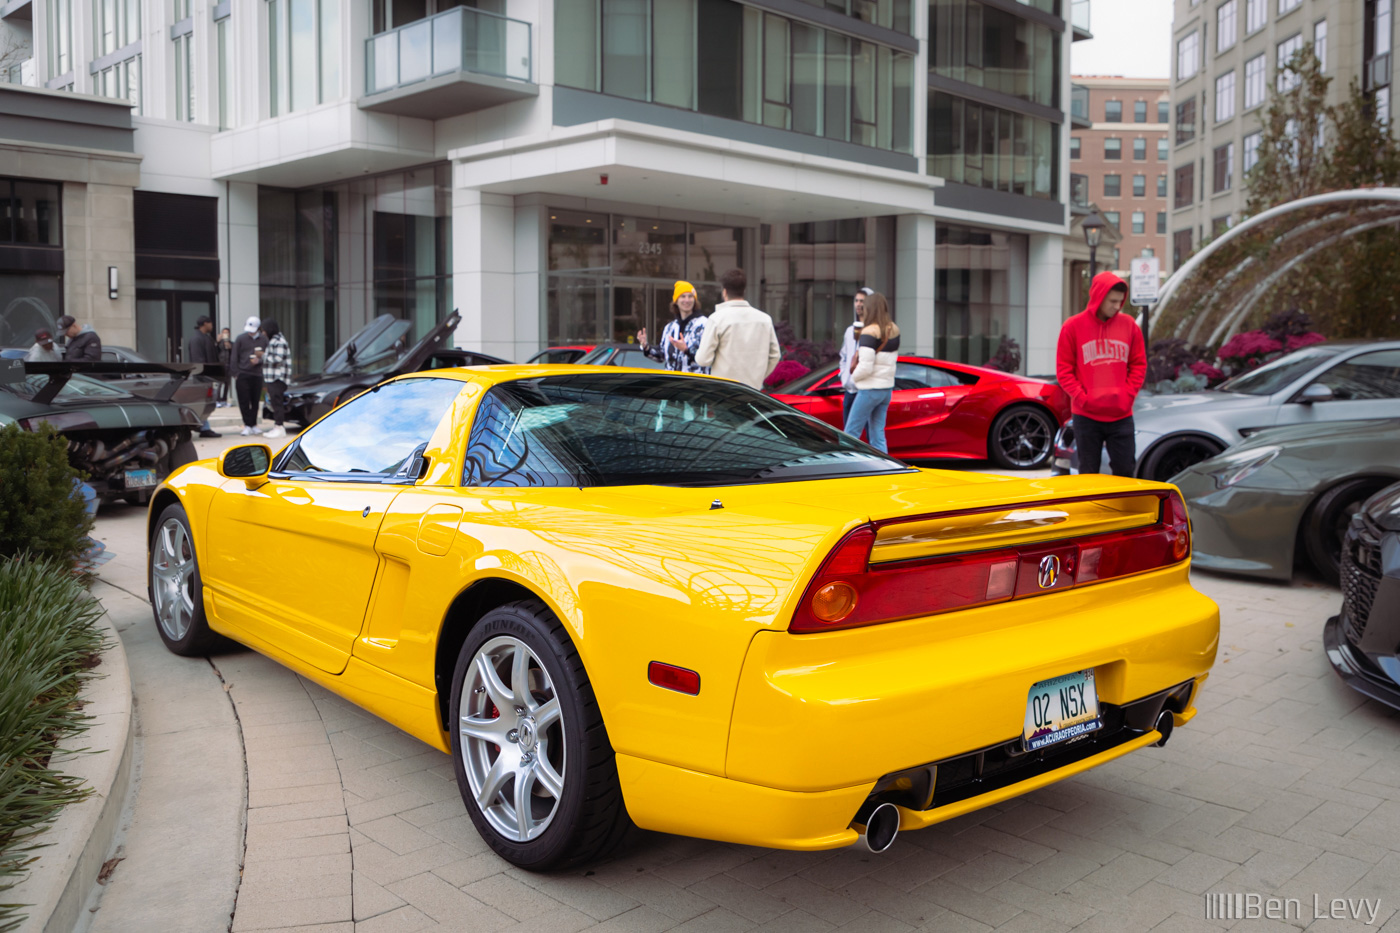 Yellow Acura NSX at Car Meet in Chicago